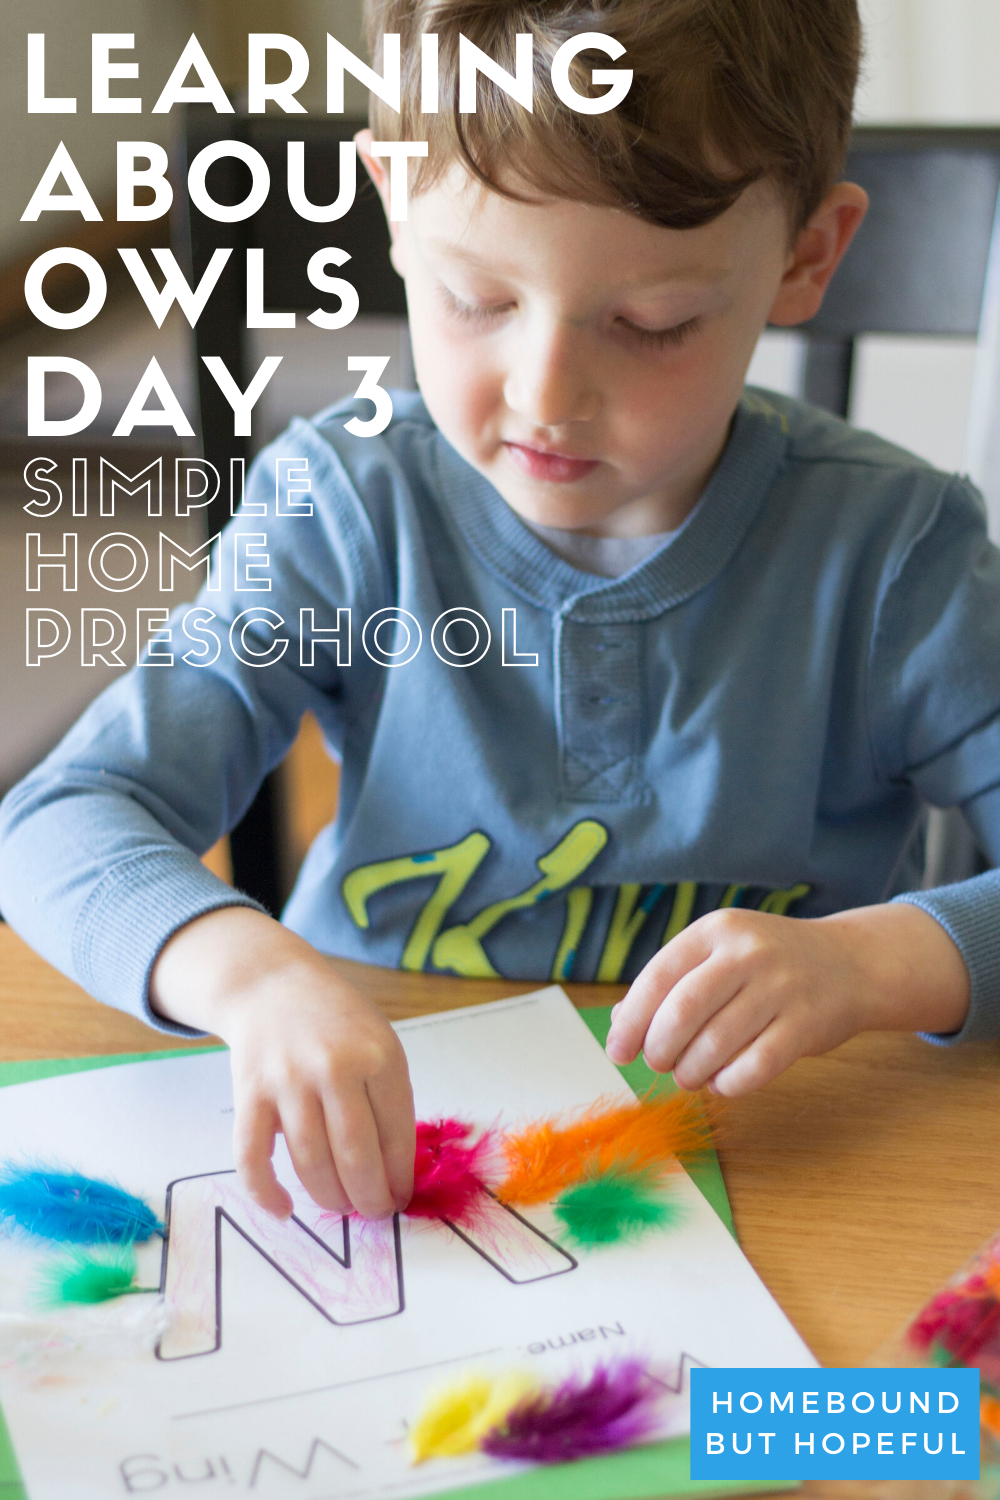 We're sharing all the fun we had discovering the parts of an owl during Day 3 of our home preschool week! Whoooo wants to see?! #homepreschool #totschool #earlylearning